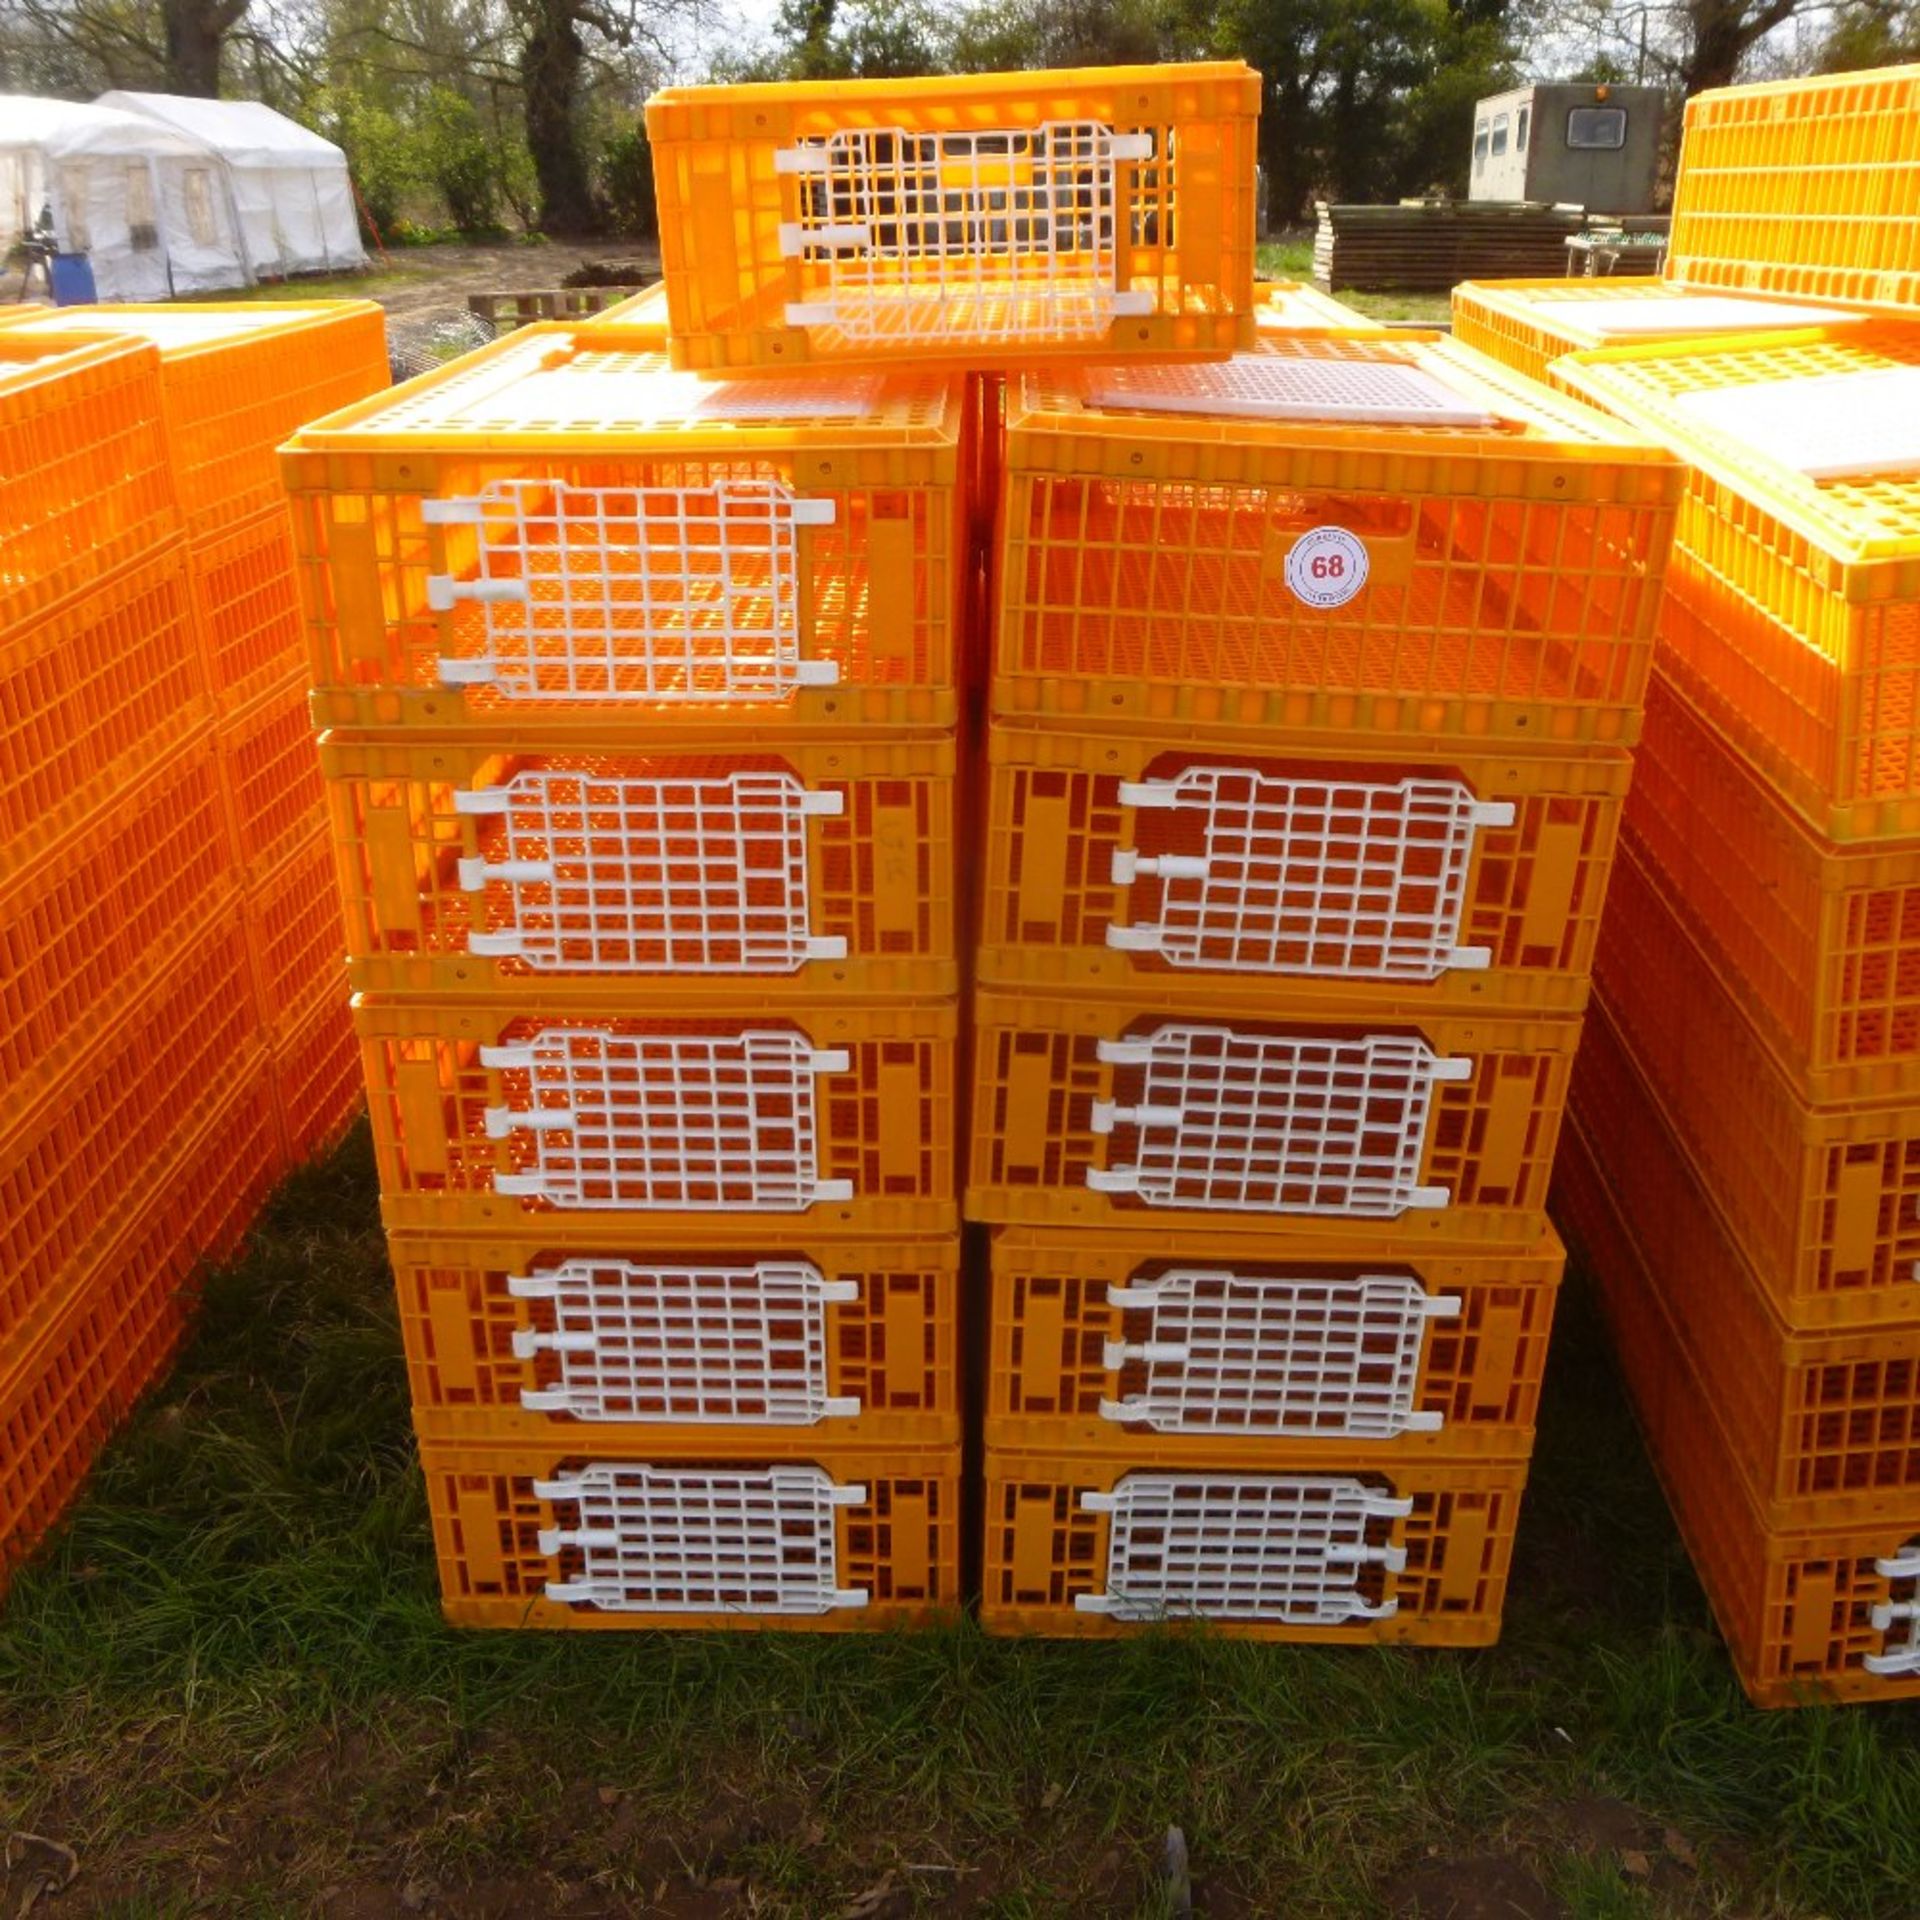 20 x D3 Giordano poultry crates